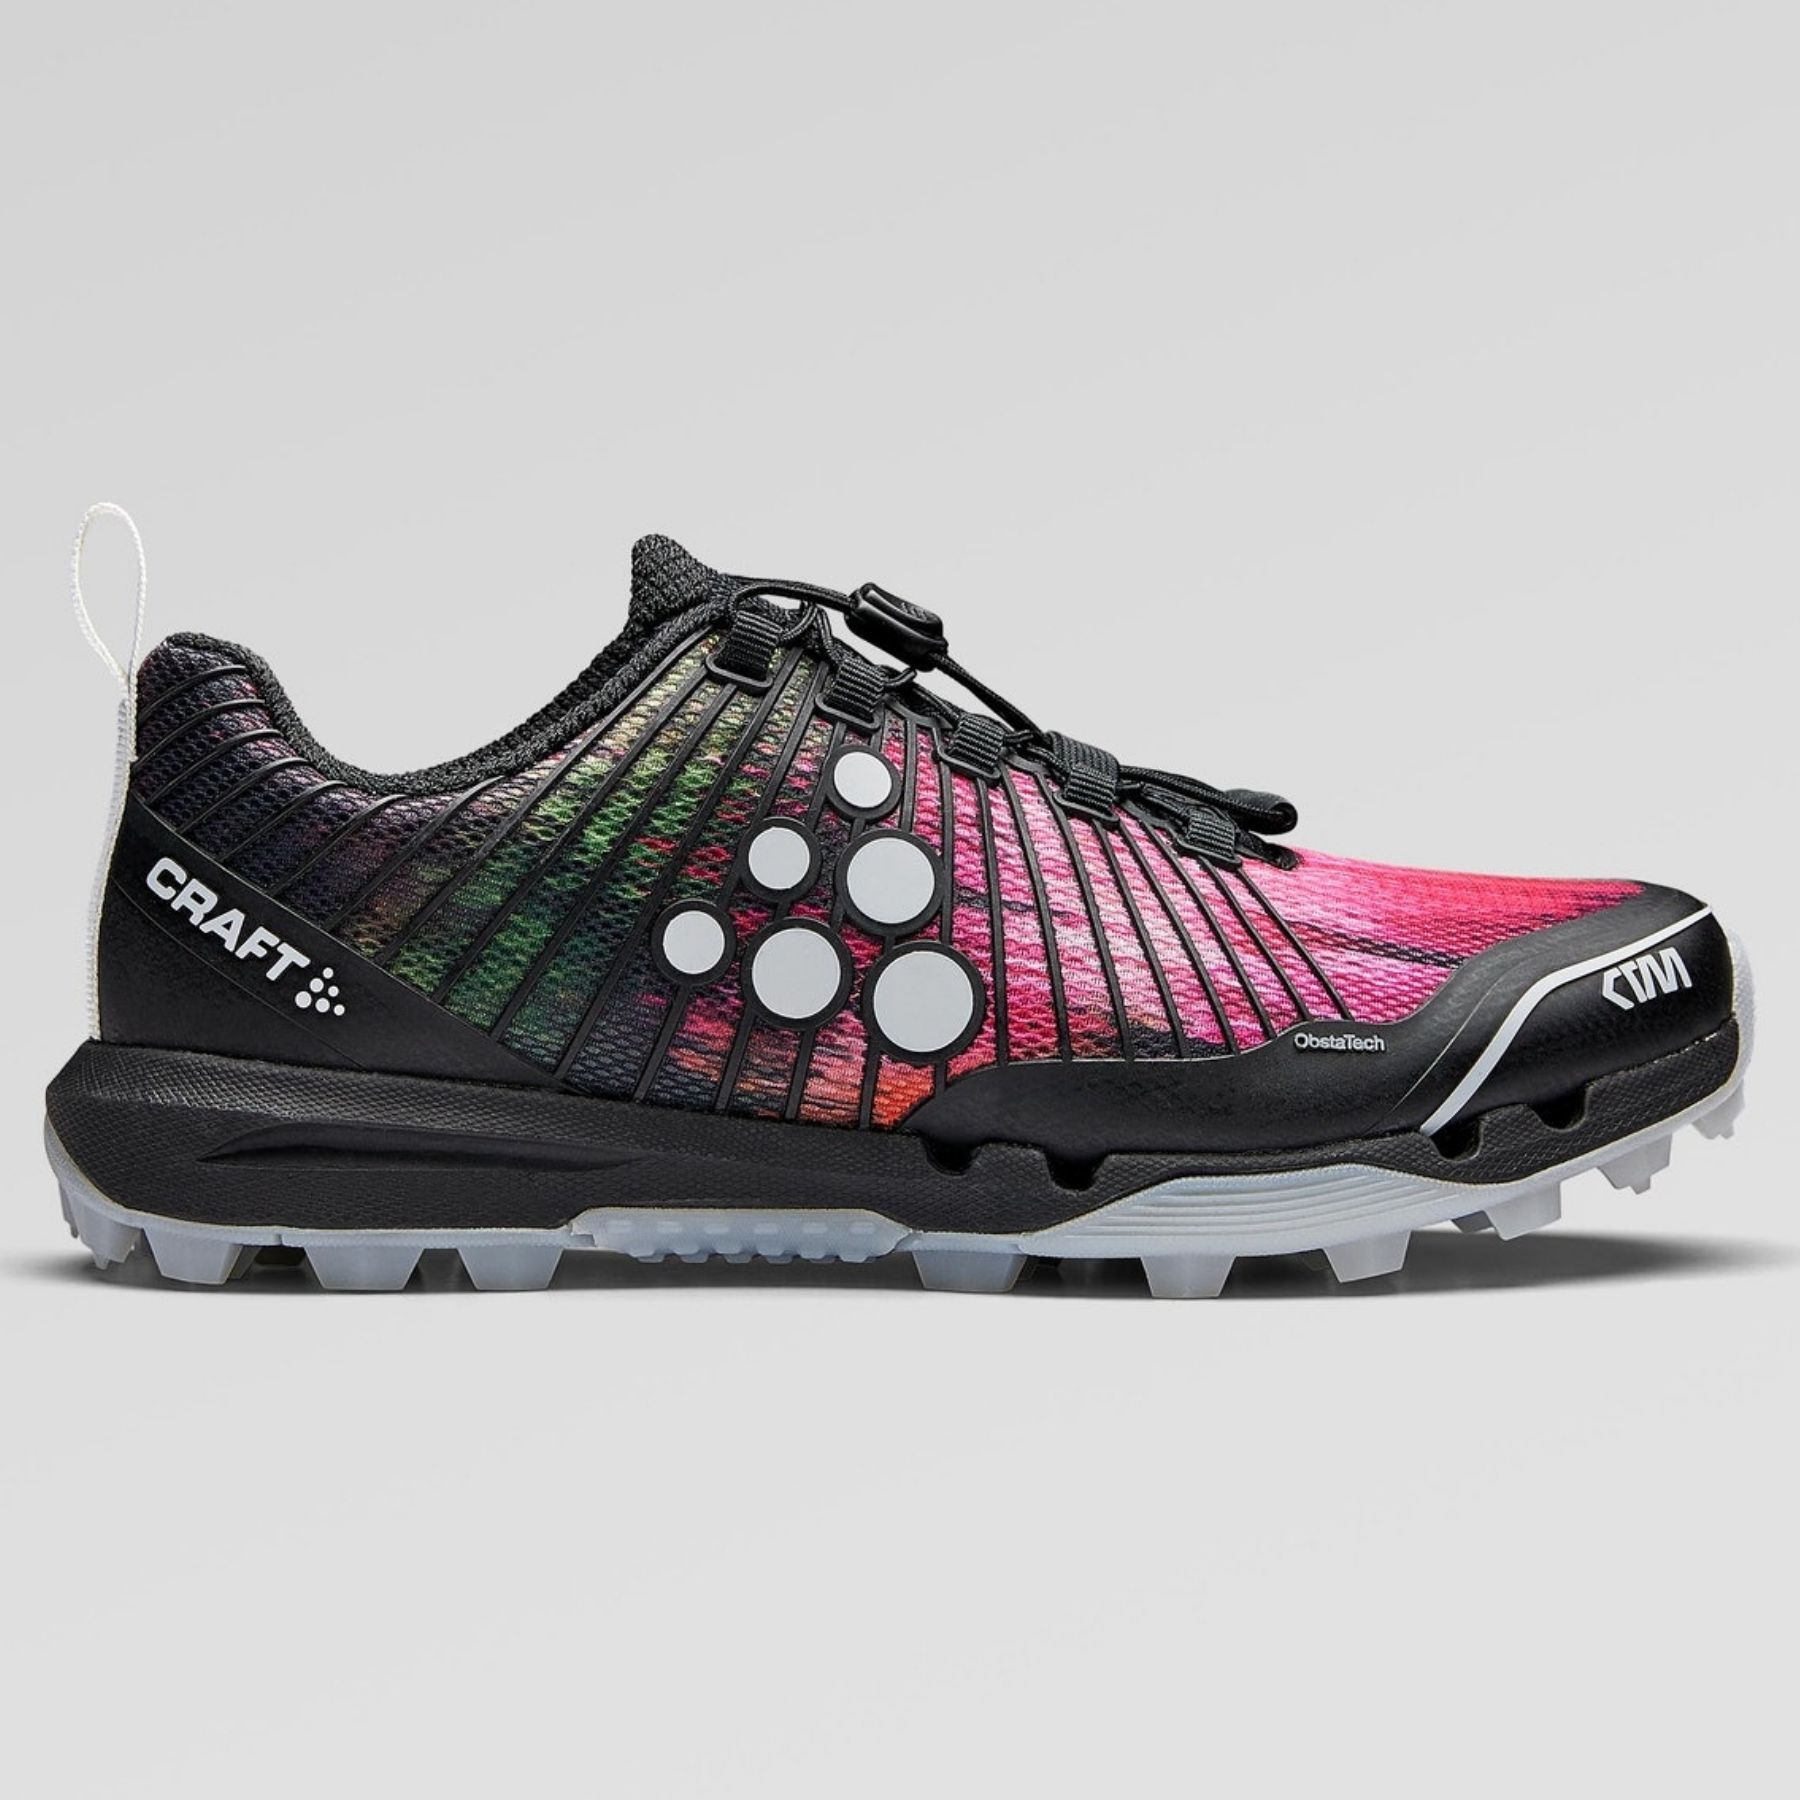 Craft OCRxCTM - Trail running shoes - Women's